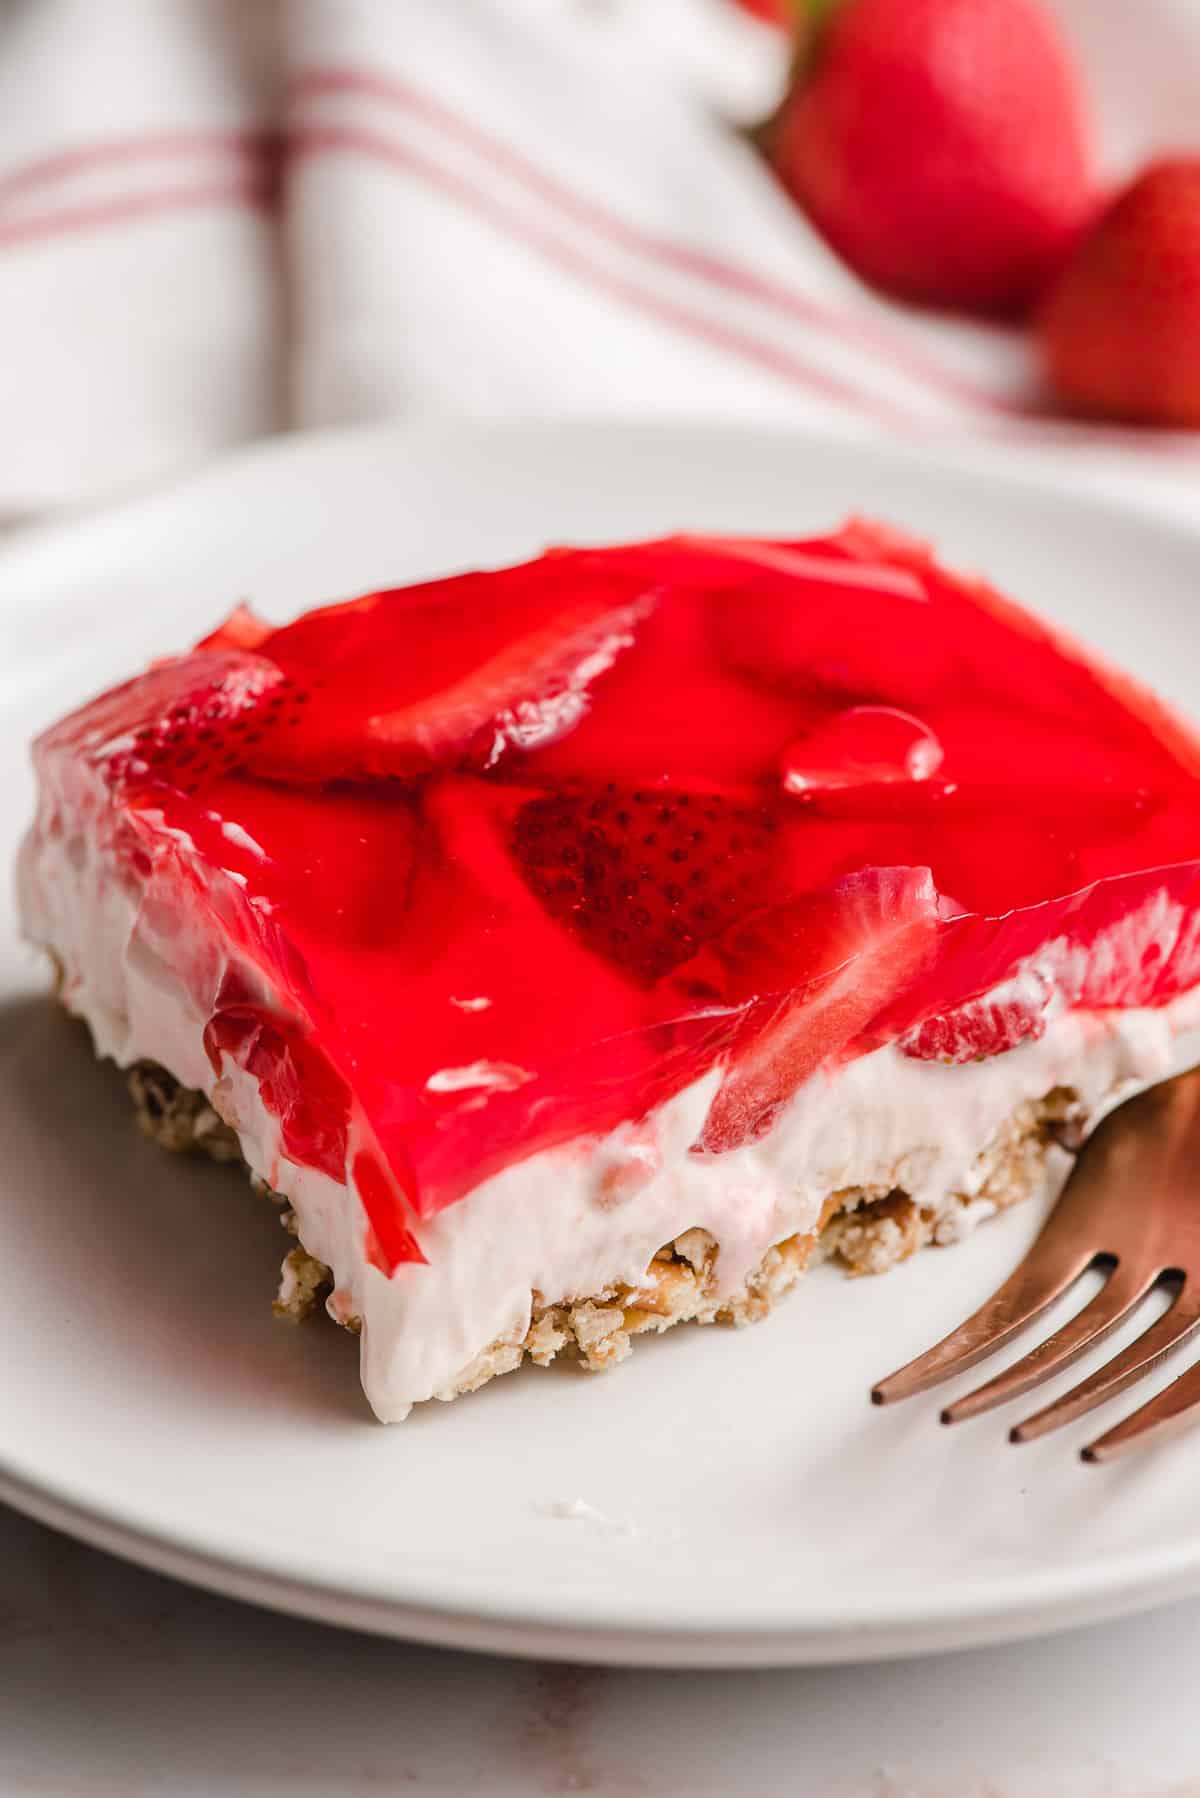 A slice of Strawberry Pretzel Salad with a pretzel crust, cream cheese filling, and strawberry jello topping.